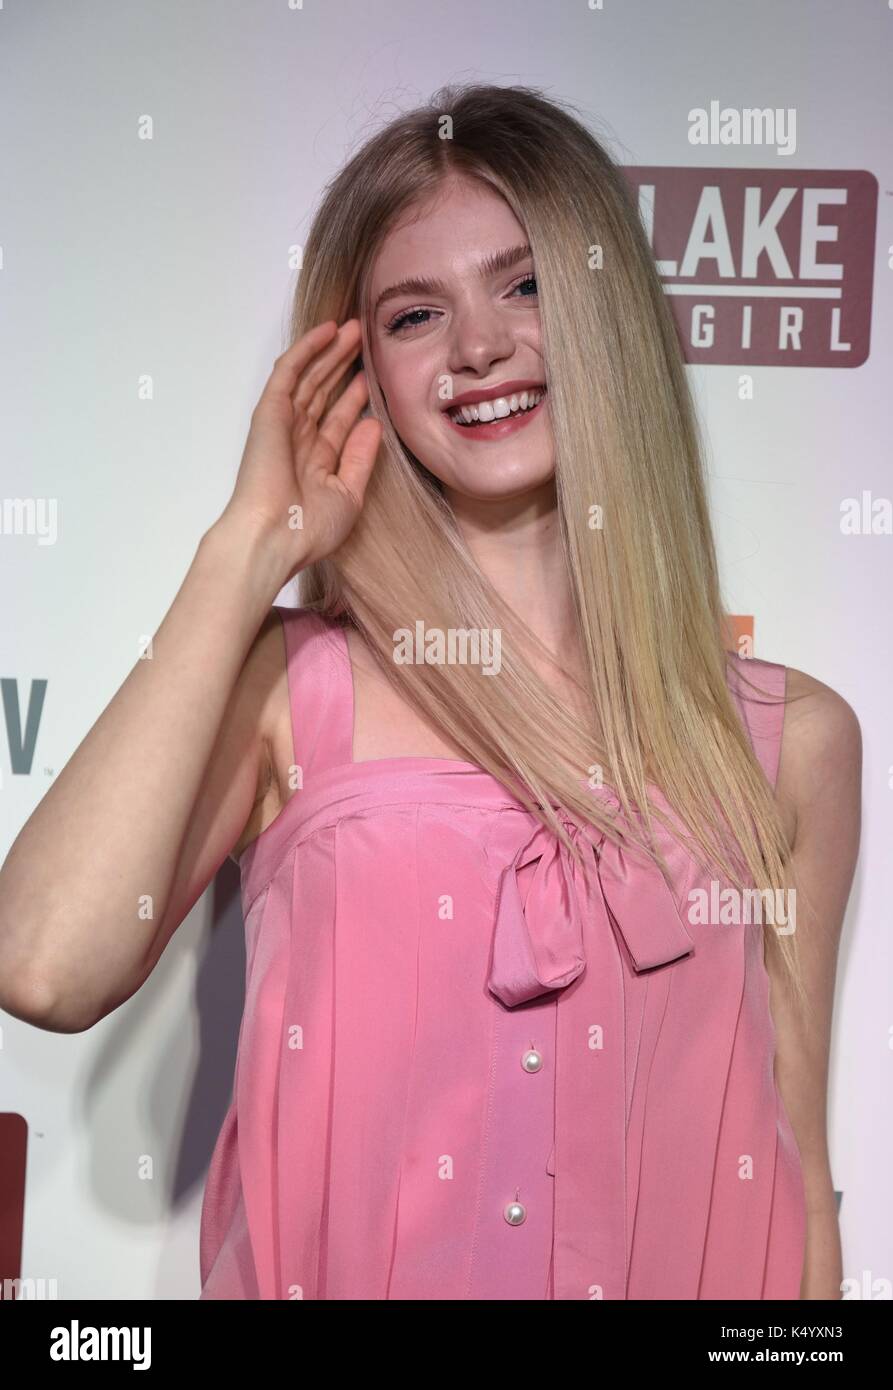 New York, NY, USA. 7th Sep, 2017. Elena Kampouris at arrivals for TOP OF THE LAKE: CHINA GIRL Premiere Presented by Film Society of Lincoln Center and Sundance TV, Walter Reade Theater, New York, NY September 7, 2017. Credit: Derek Storm/Everett Collection/Alamy Live News Stock Photo